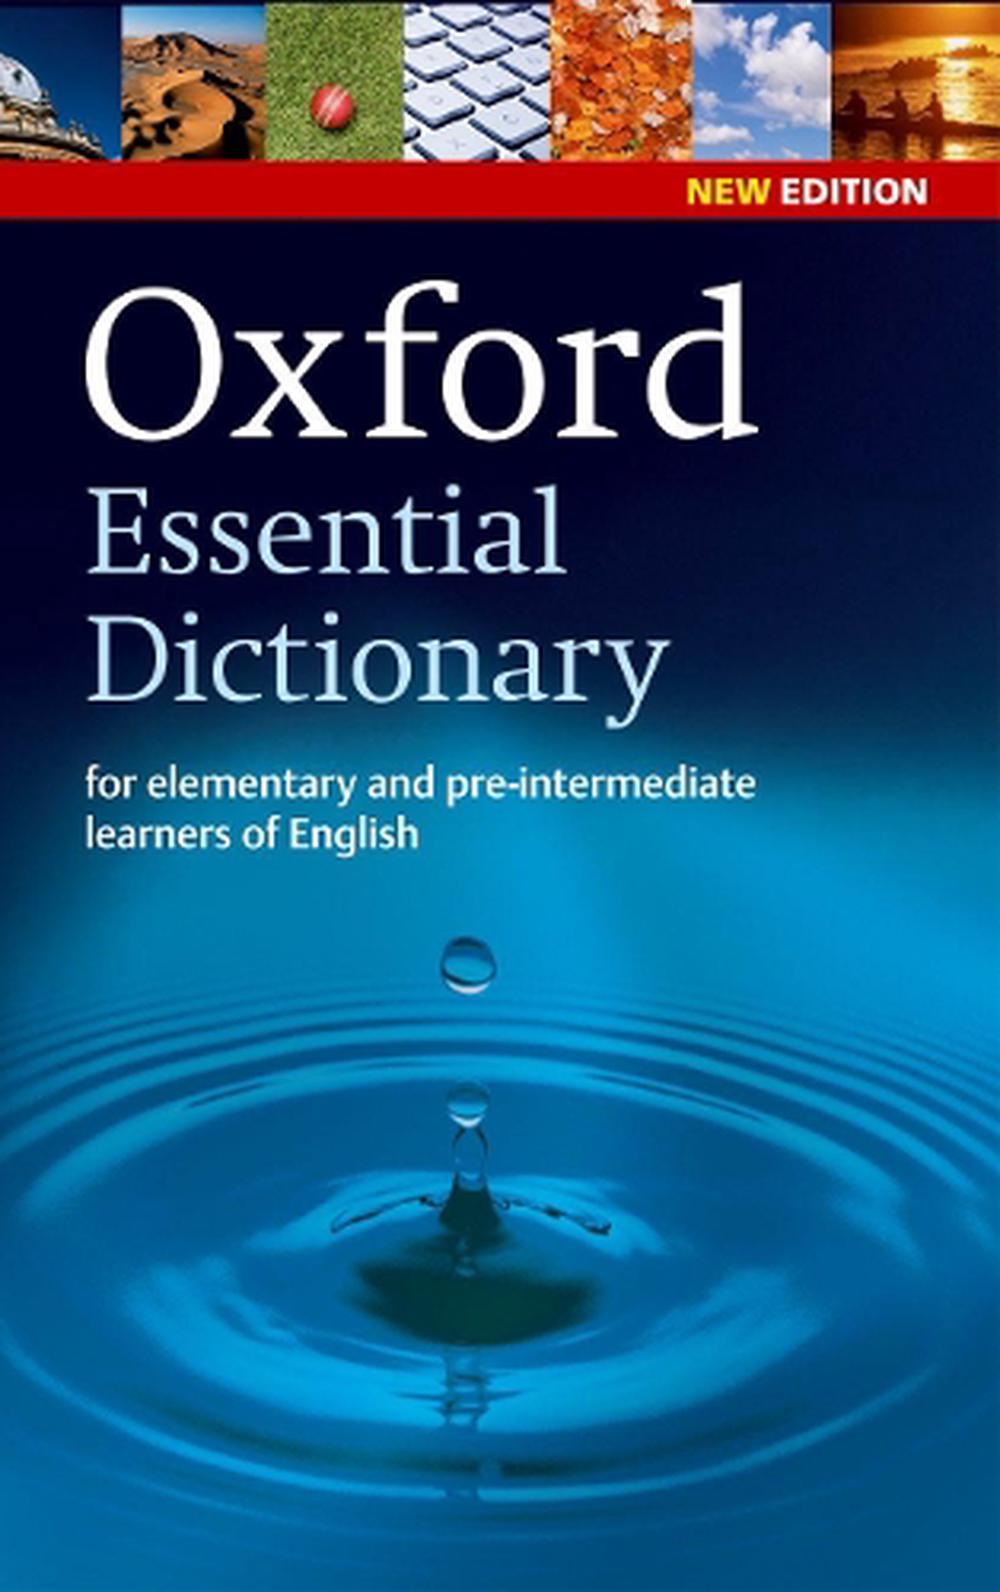 New Oxford American Dictionary 3rd ed - 洋書